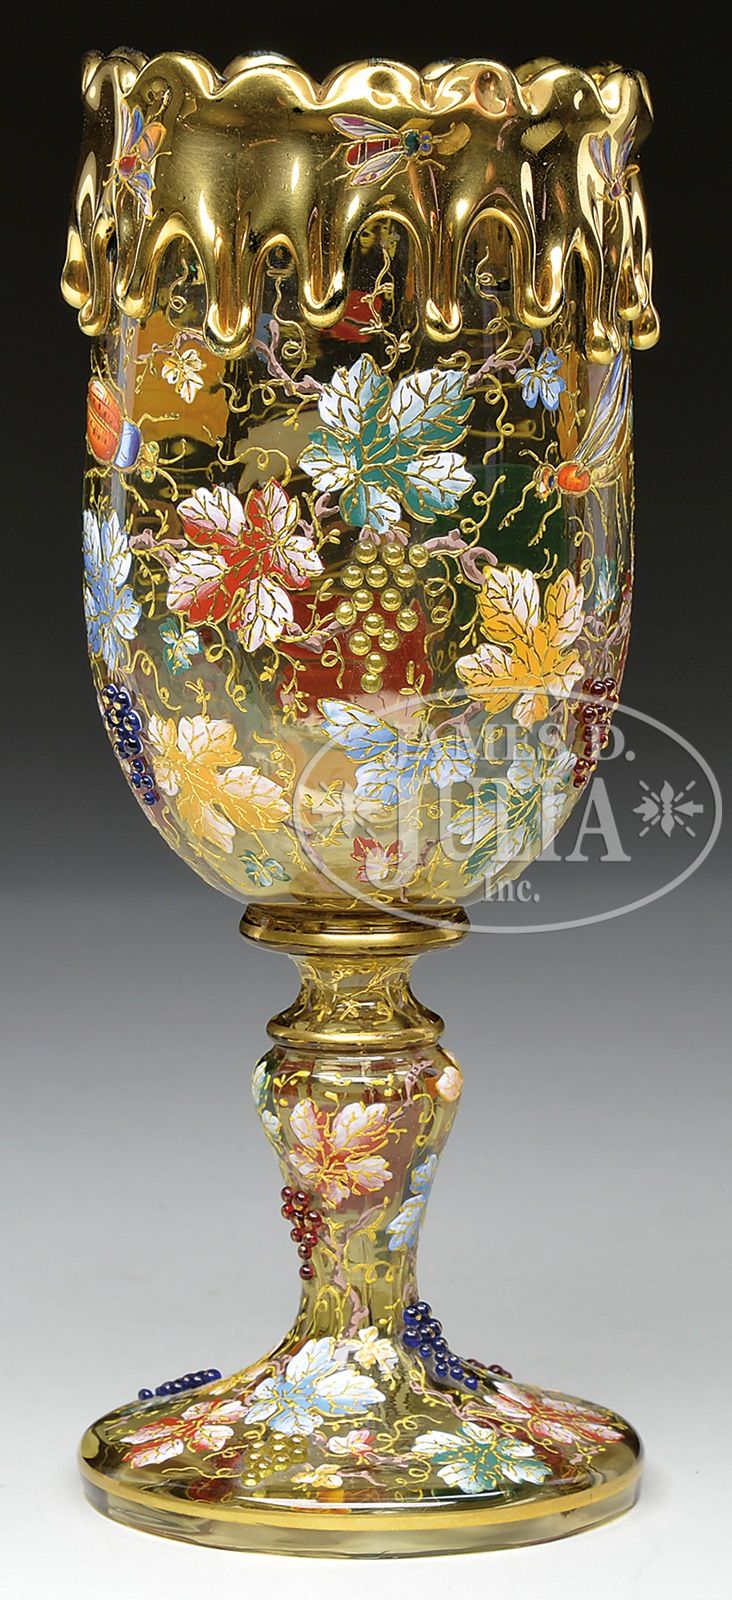 MOSER DECORATED CHALICE. Moser amber glass chalice is decorated with an allover...